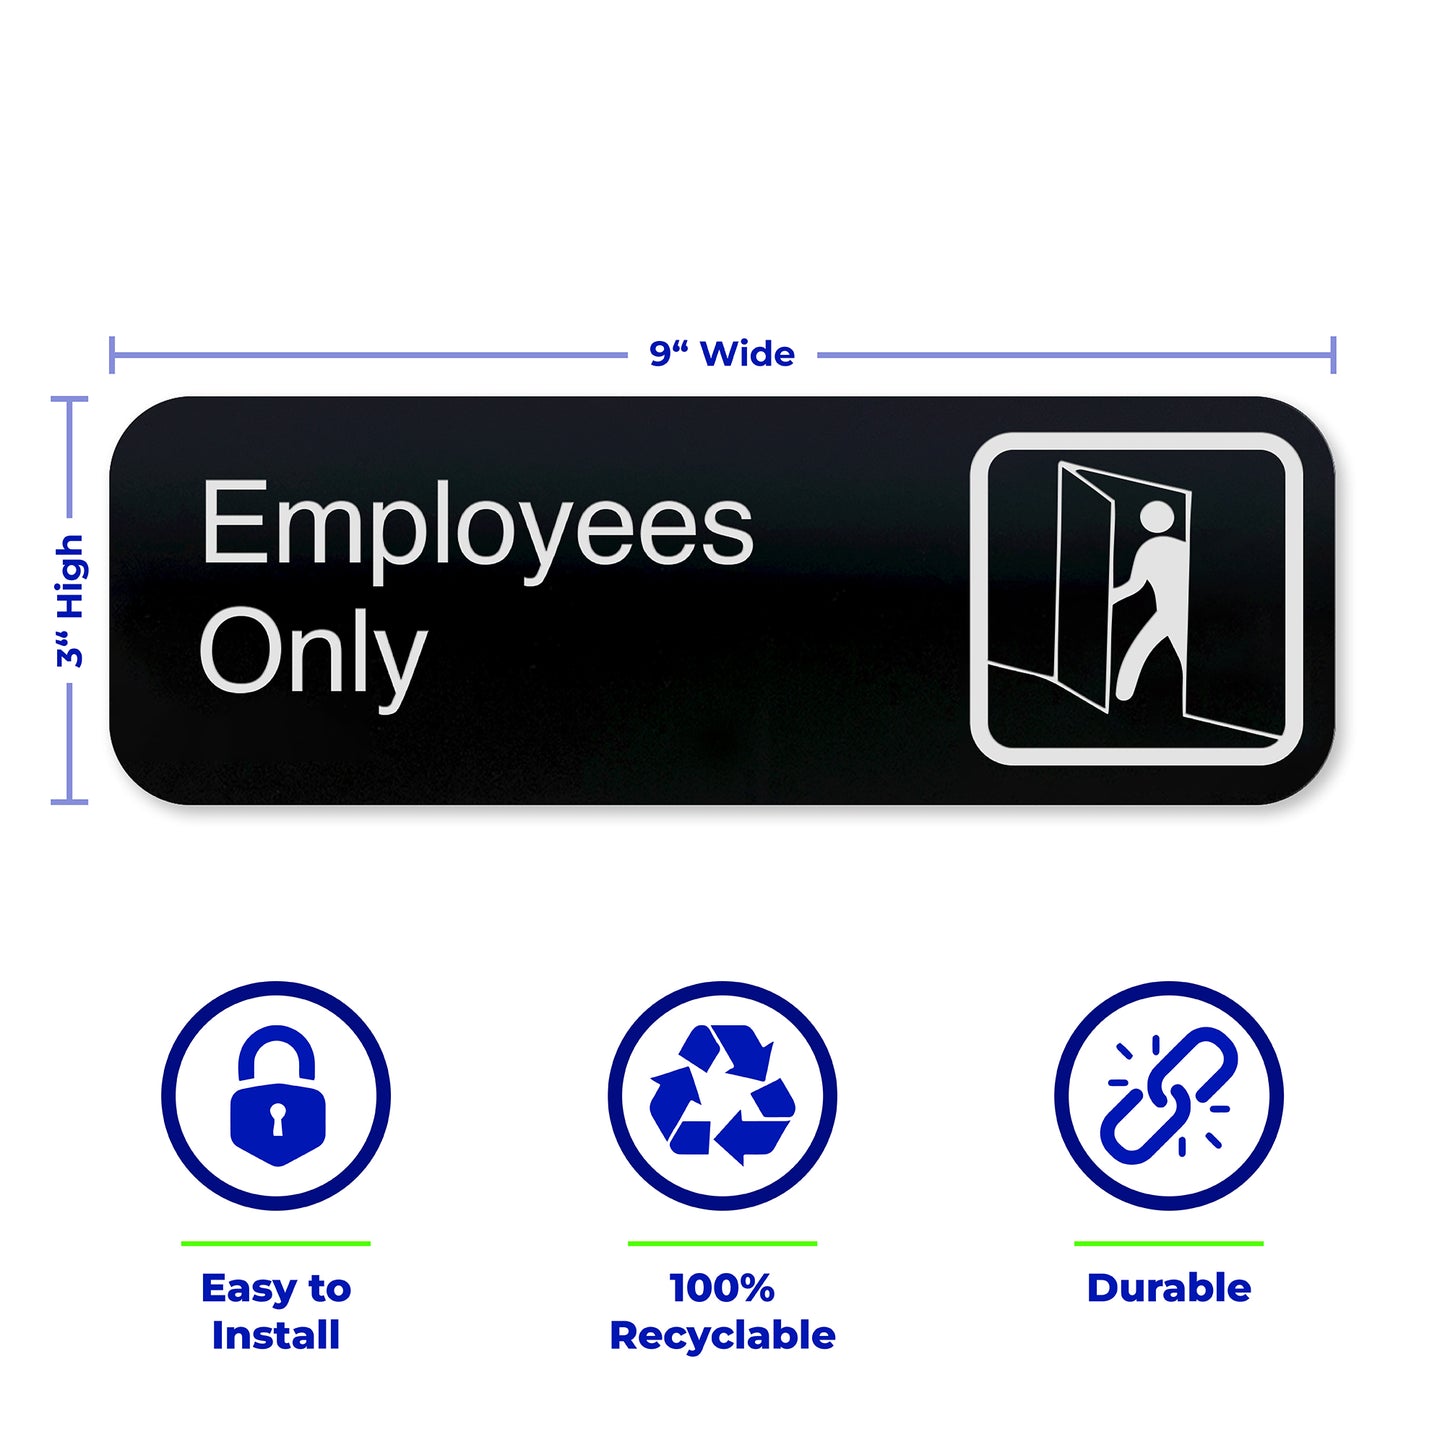 EMPLOYEES ONLY Sign Package, Black Acrylic, White Text, 9"x 3" - SET OF 3